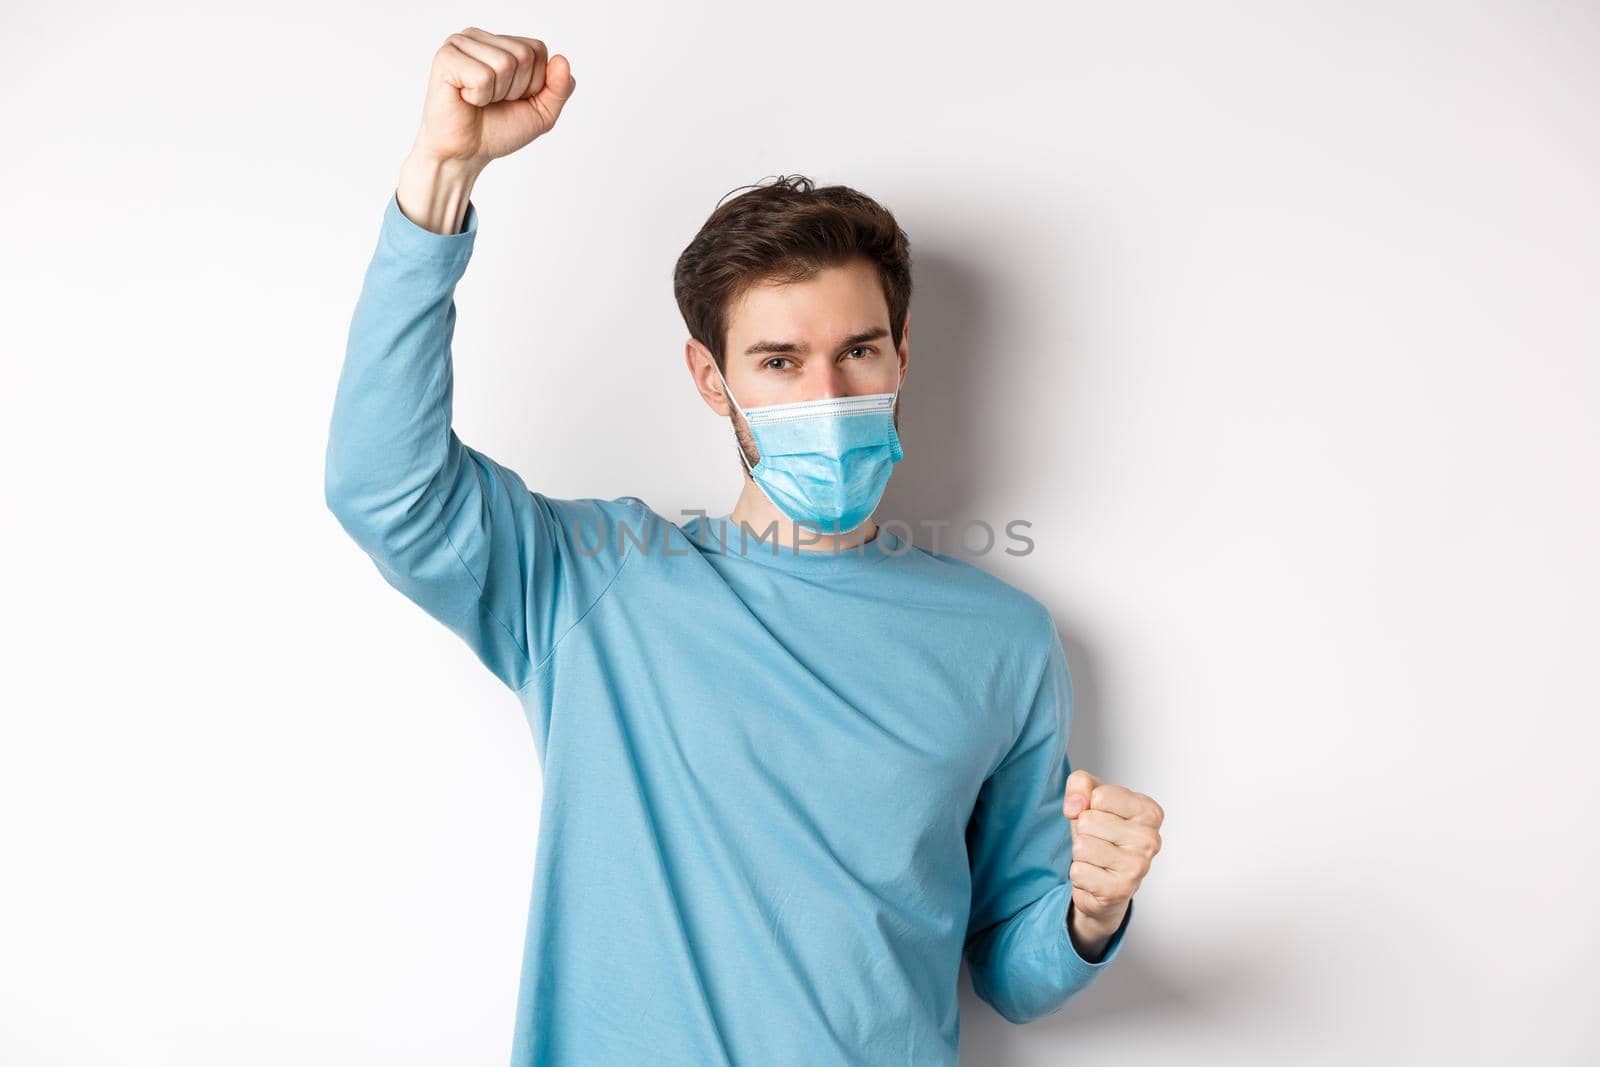 Covid-19, pandemic and social distancing concept. Happy and lucky guy in medical mask winning, raising hands up and celebrating achievement, white background.